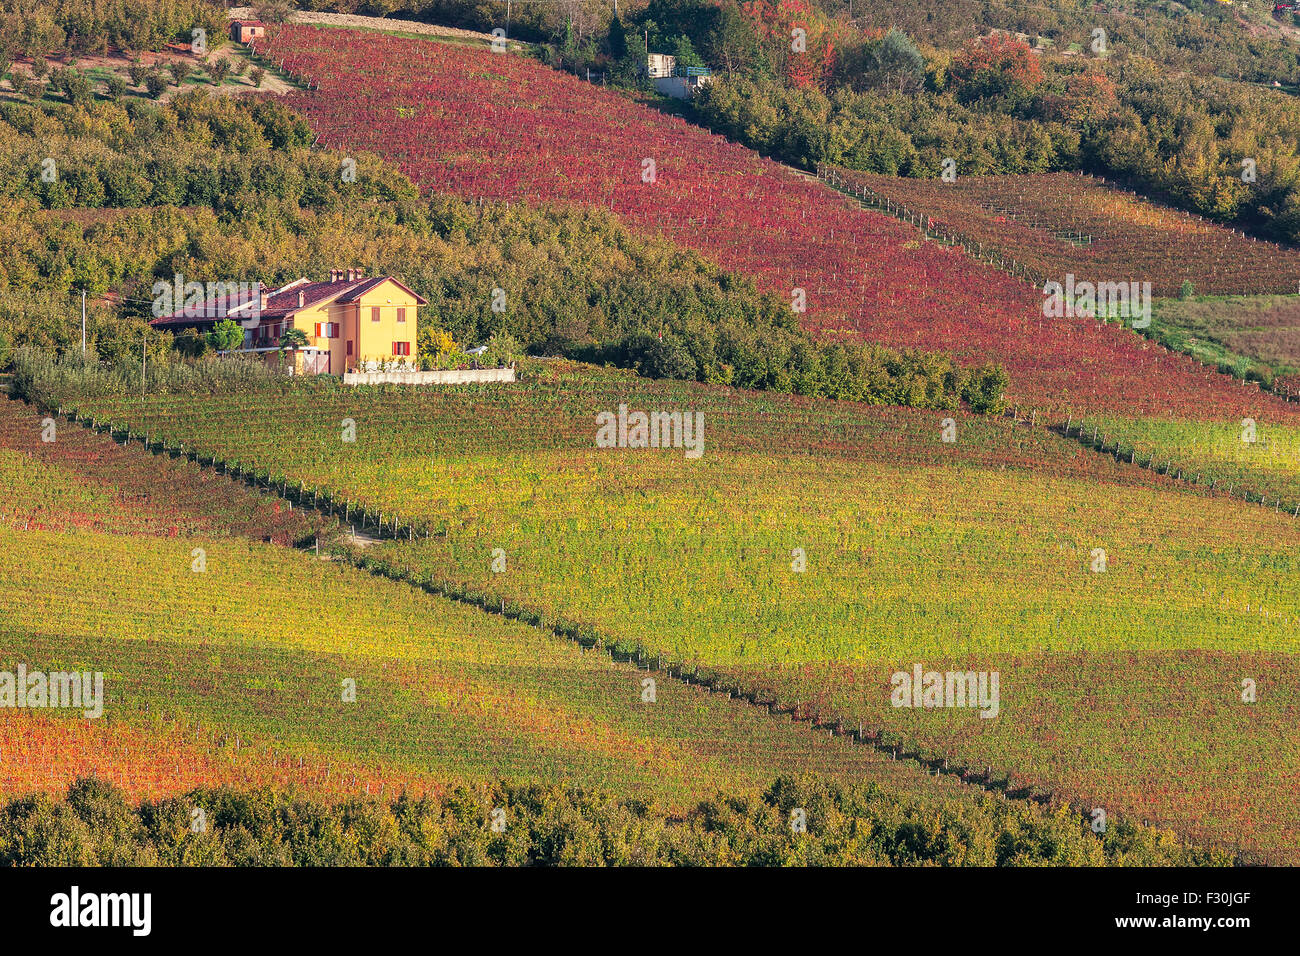 Rural house among autumnal vineyards in Piedmont, Northern Italy. Stock Photo